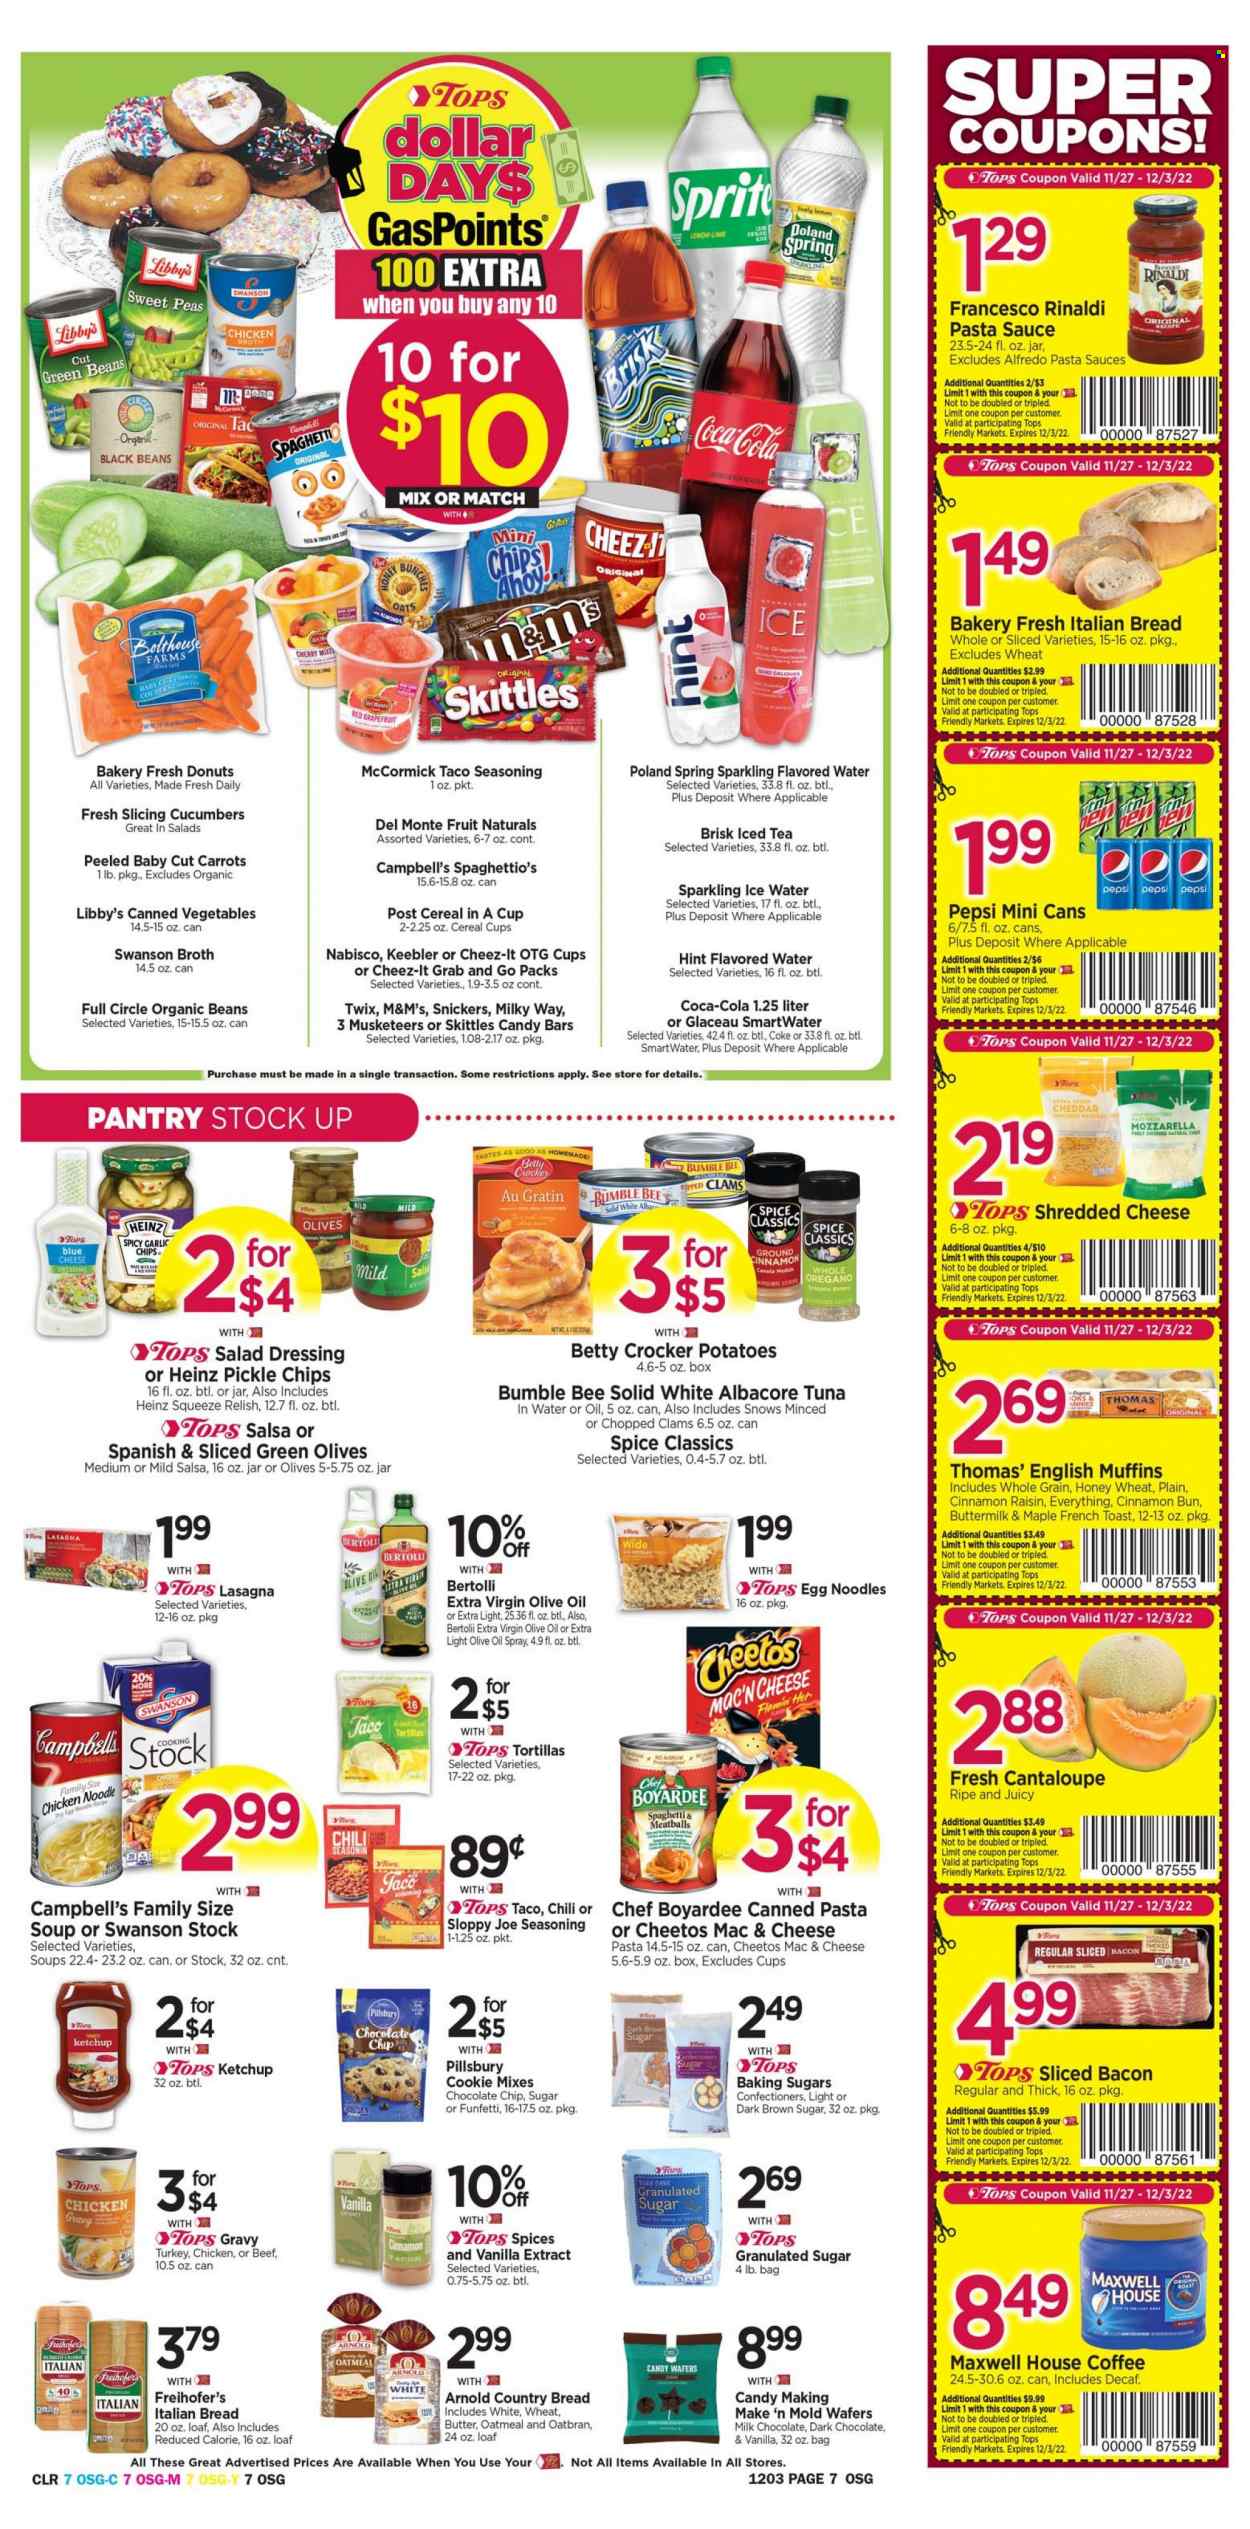 thumbnail - Tops Flyer - 11/27/2022 - 12/03/2022 - Sales products - bread, english muffins, tortillas, donut, cantaloupe, cucumber, garlic, green beans, potatoes, grapefruits, cherries, clams, tuna, Campbell's, spaghetti, pasta sauce, meatballs, soup, Bumble Bee, Pillsbury, noodles, lasagna meal, Annie's, Bertolli, bacon, shredded cheese, buttermilk, milk chocolate, wafers, Milky Way, Snickers, Twix, M&M's, dark chocolate, Skittles, Keebler, Cheetos, chips, Cheez-It, granulated sugar, chicken broth, oatmeal, oats, broth, vanilla extract, black beans, tuna in water, Heinz, olives, canned vegetables, Chef Boyardee, Del Monte, cereals, egg noodles, spice, blue cheese dressing, salad dressing, ketchup, chicken gravy, dressing, salsa, extra virgin olive oil, olive oil, Coca-Cola, Sprite, Pepsi, ice tea, flavored water, Smartwater, Maxwell House, coffee. Page 7.